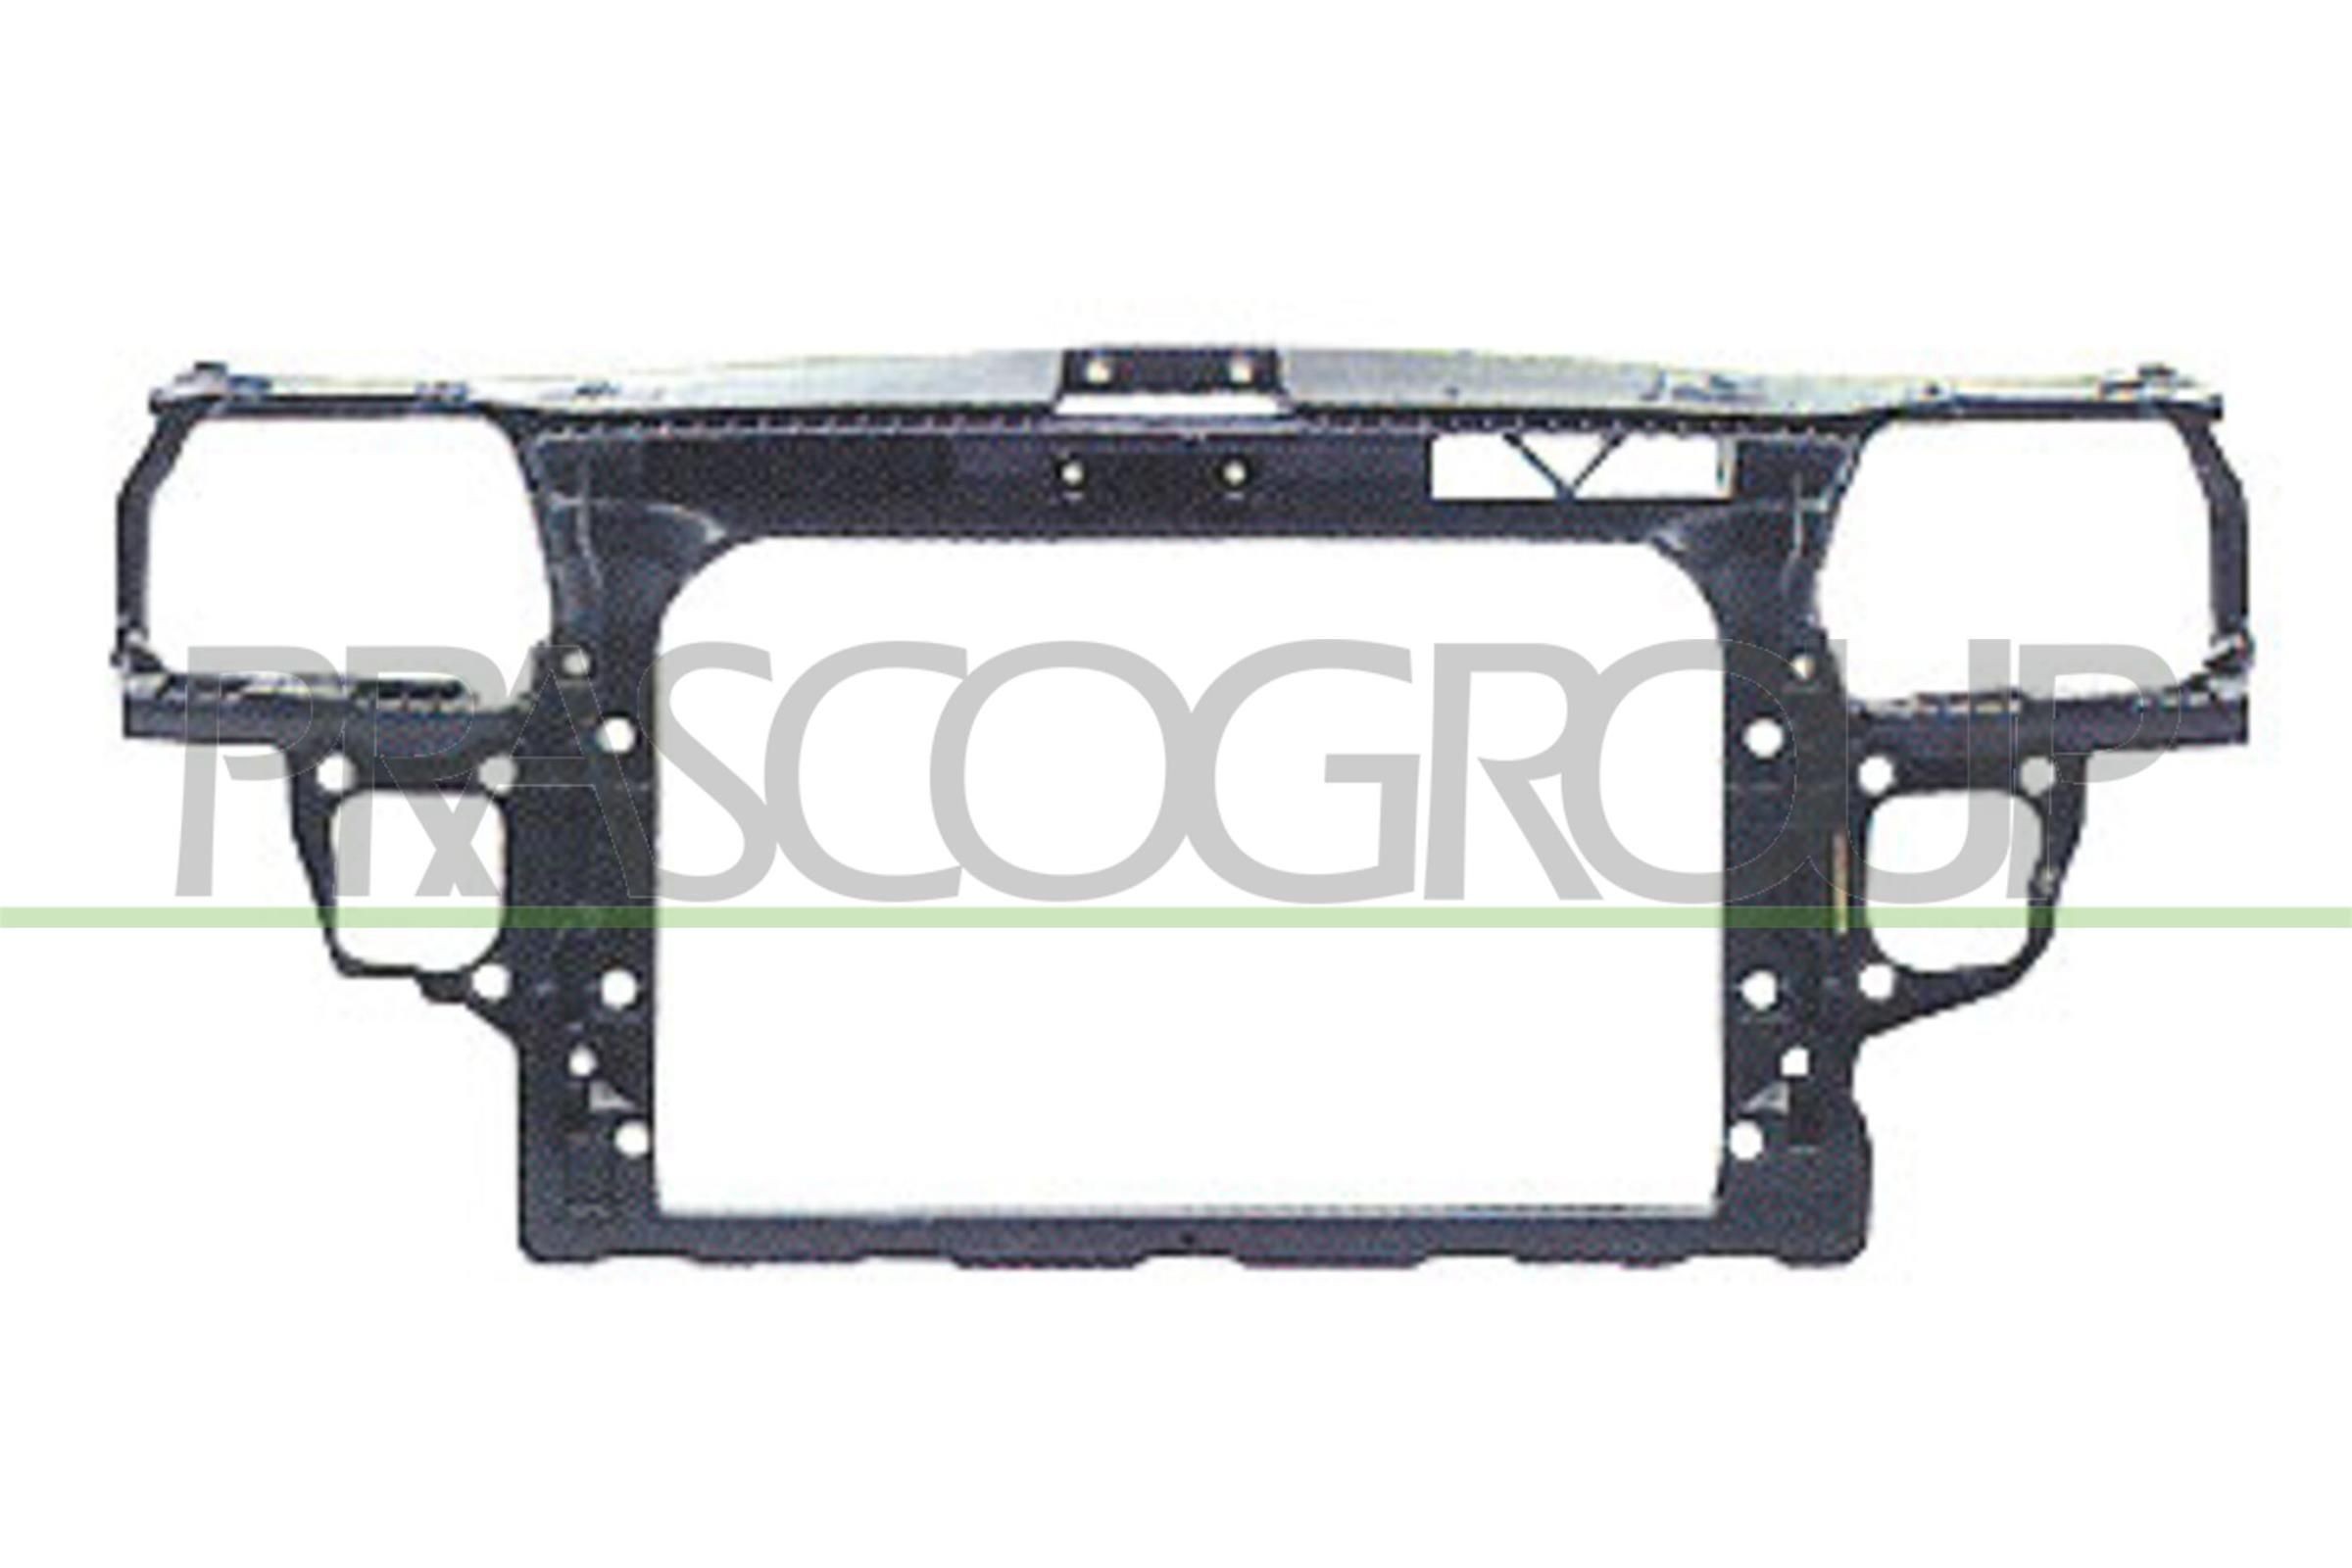 Audi Front Cowling PRASCO AD0163200 at a good price